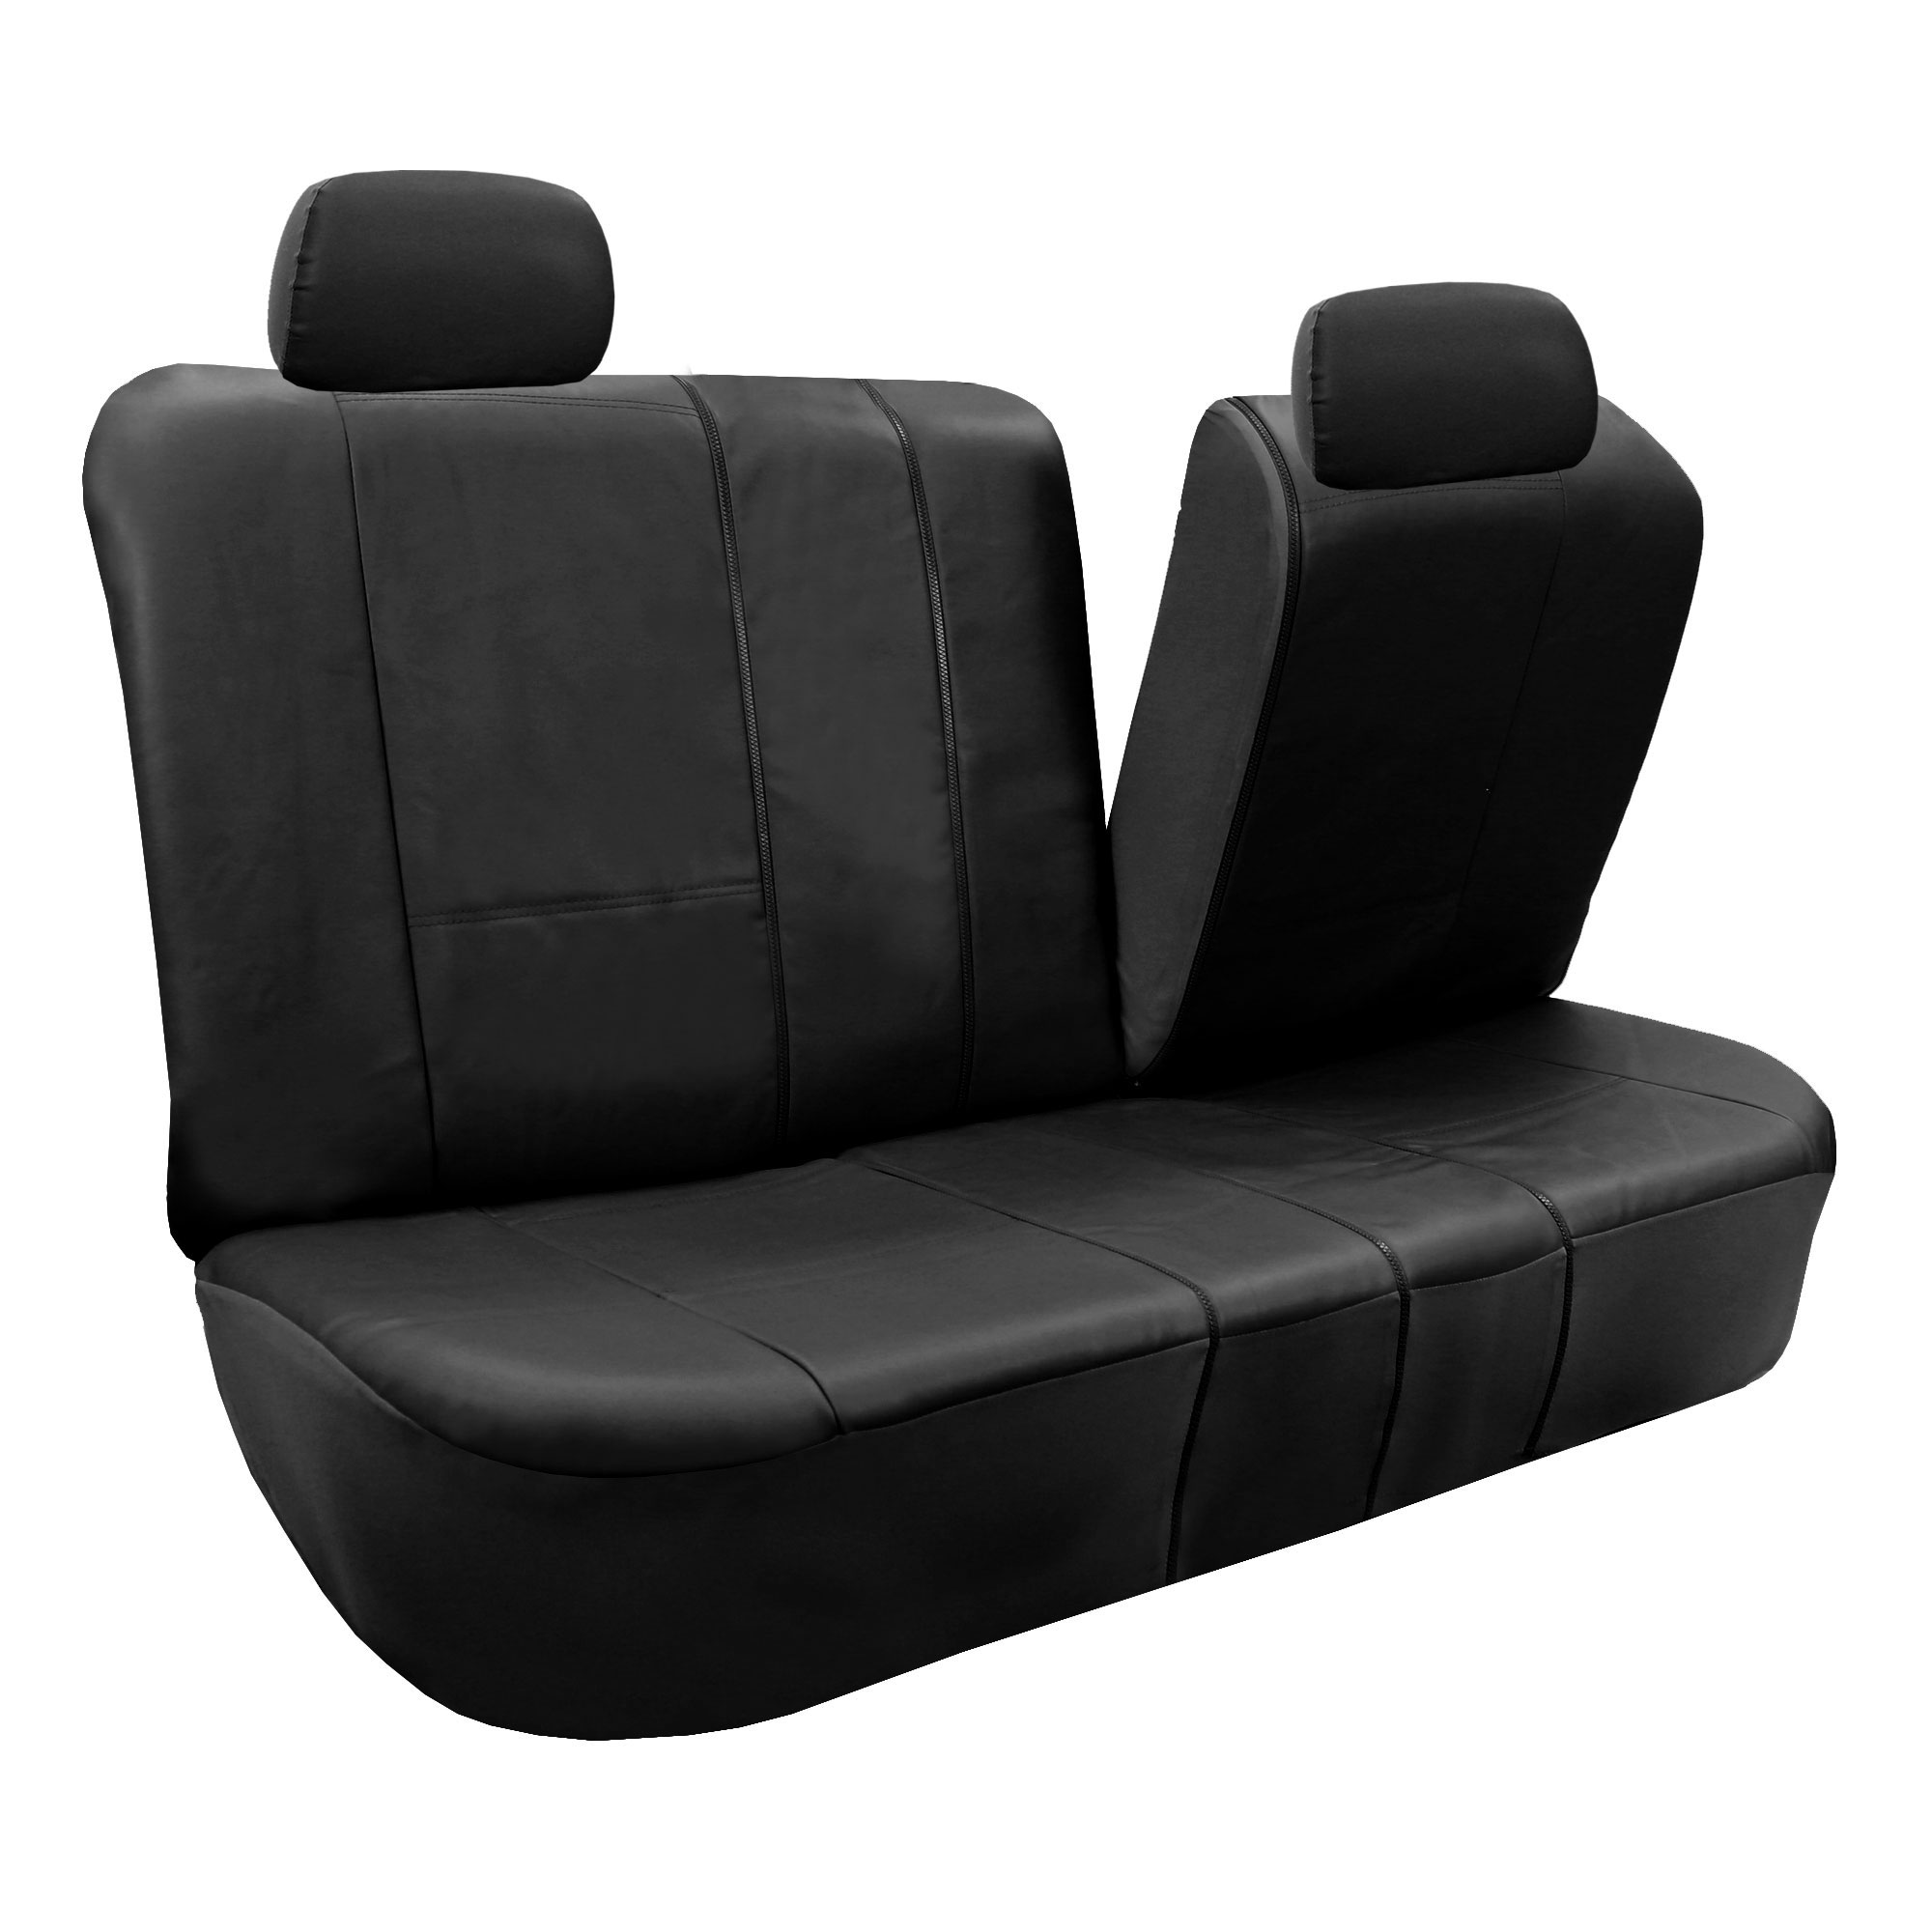 FH Group Faux Leather Airbag Compatible and Split Bench Car Seat Covers, Full Set, Black - image 3 of 4